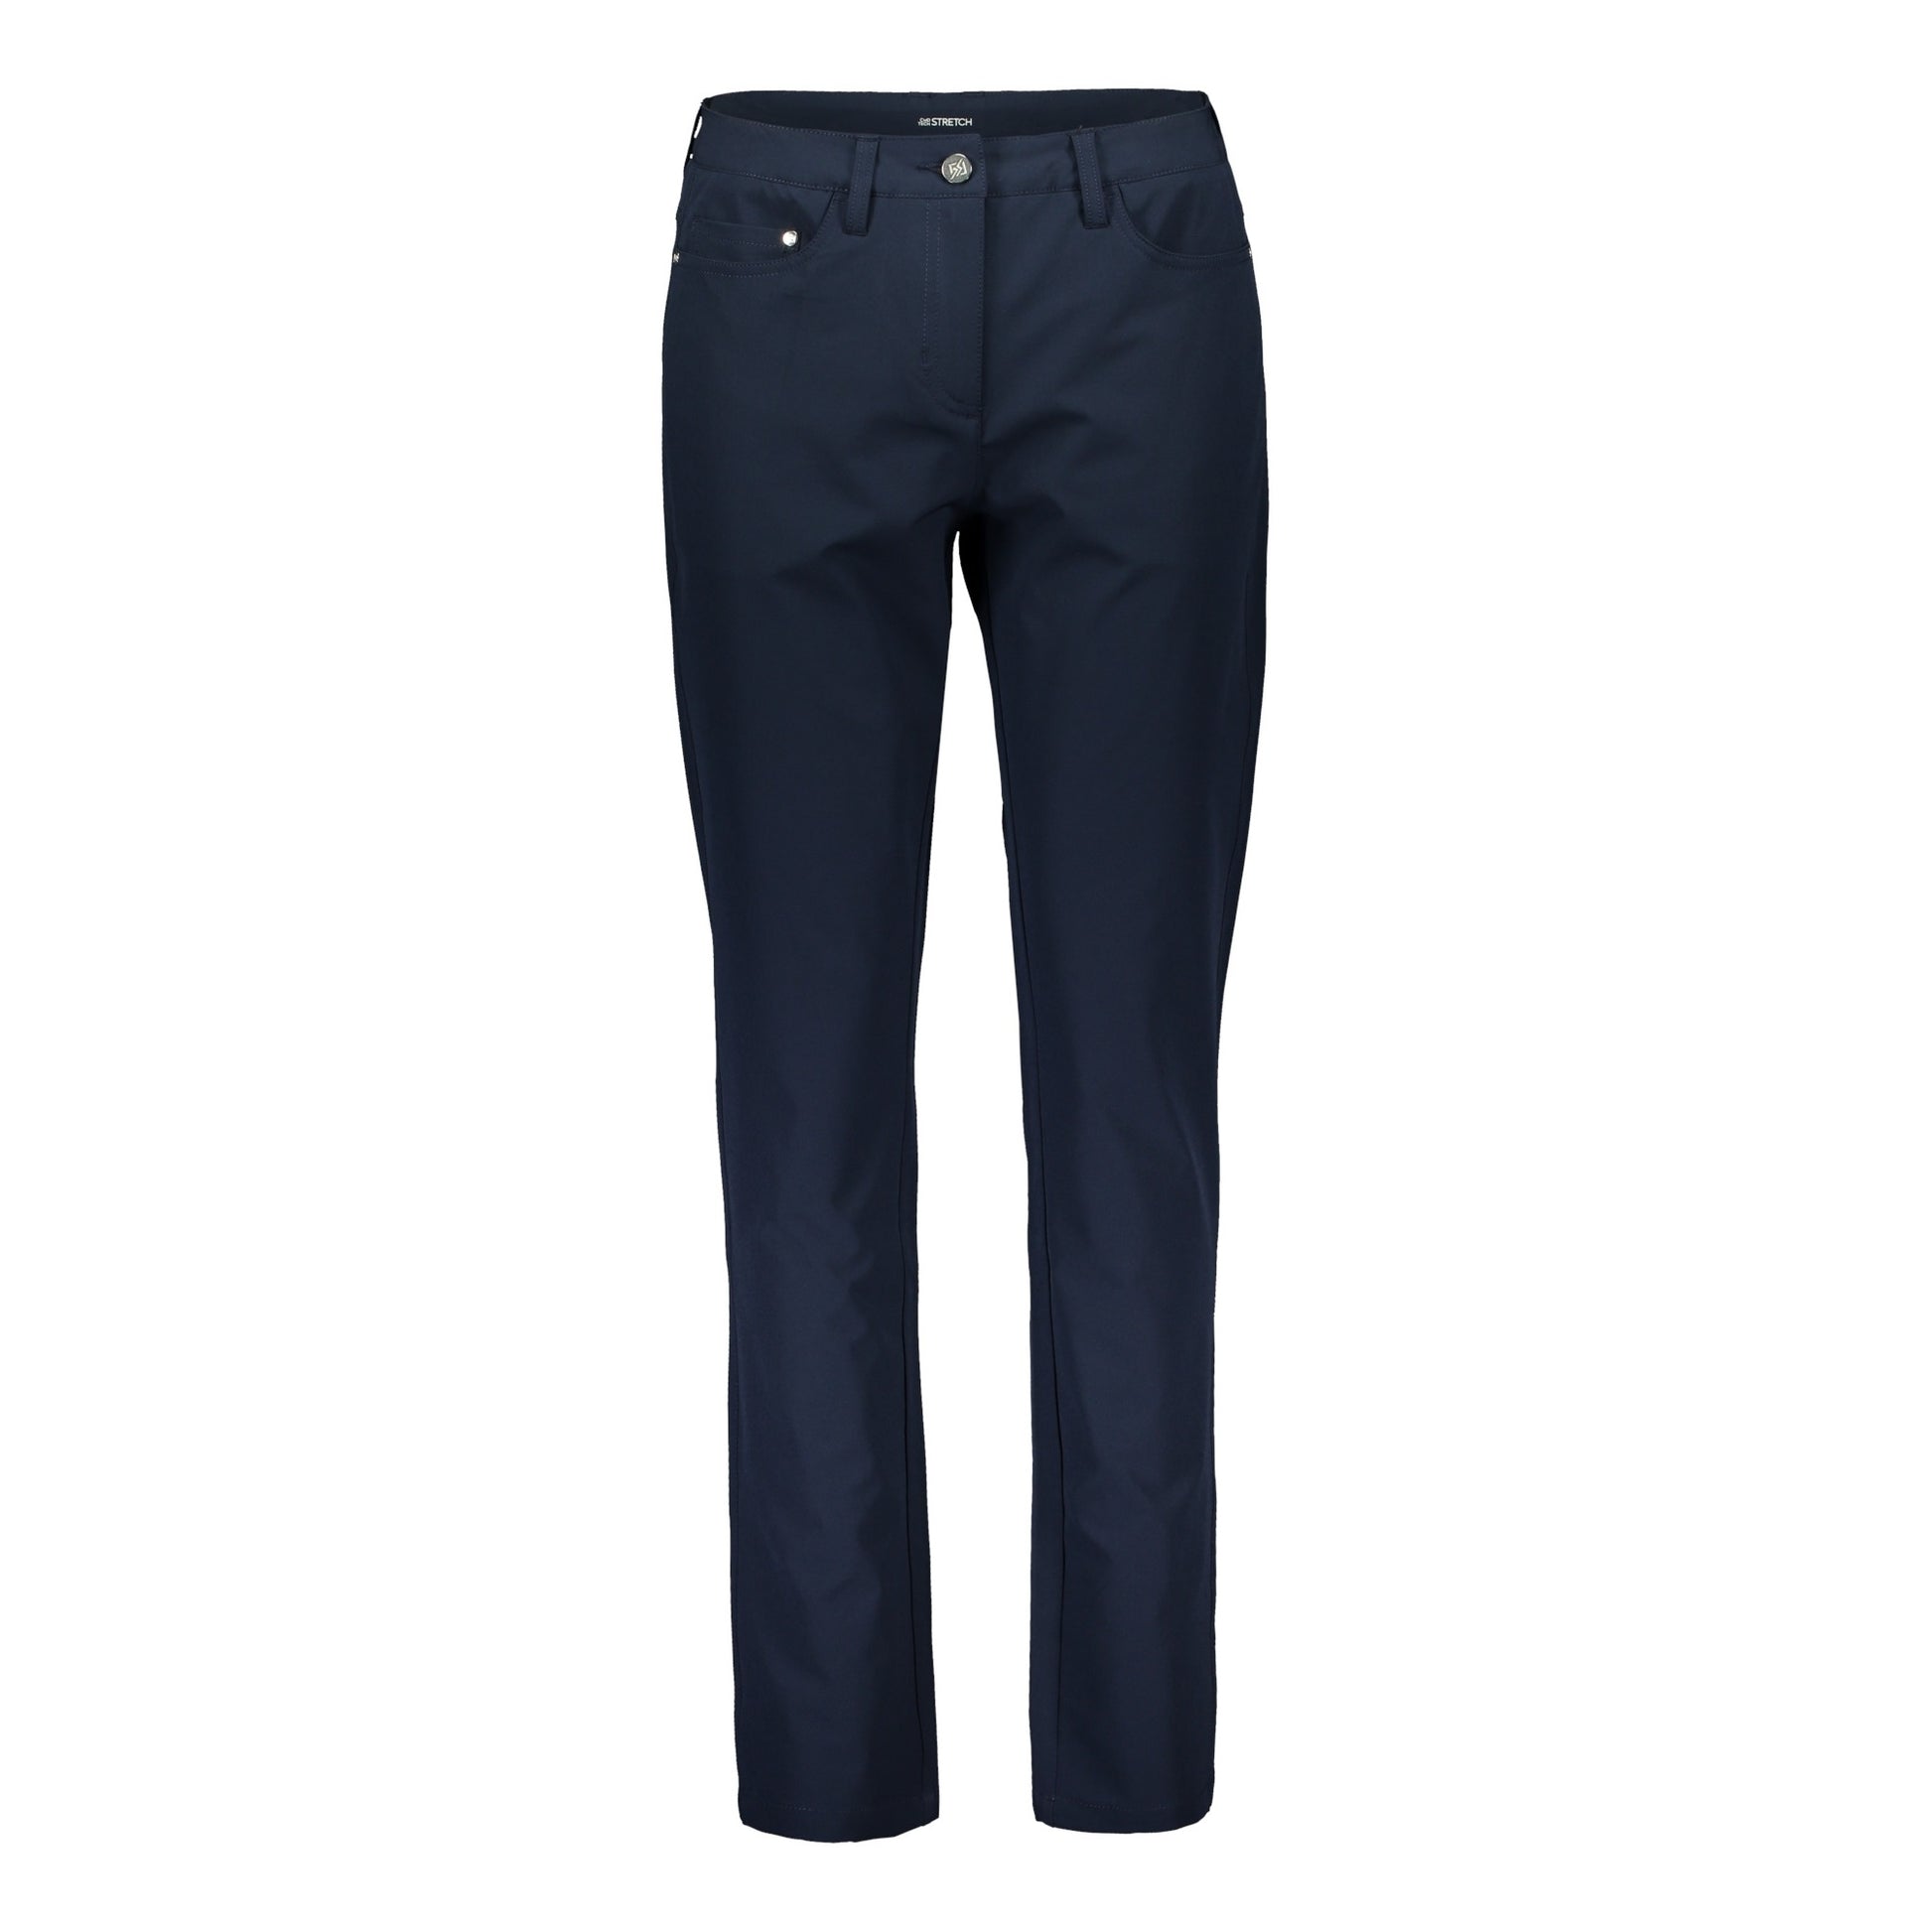 803121 Catmandoo Timea Ladies Navy Stretch Trousers Product Image Front